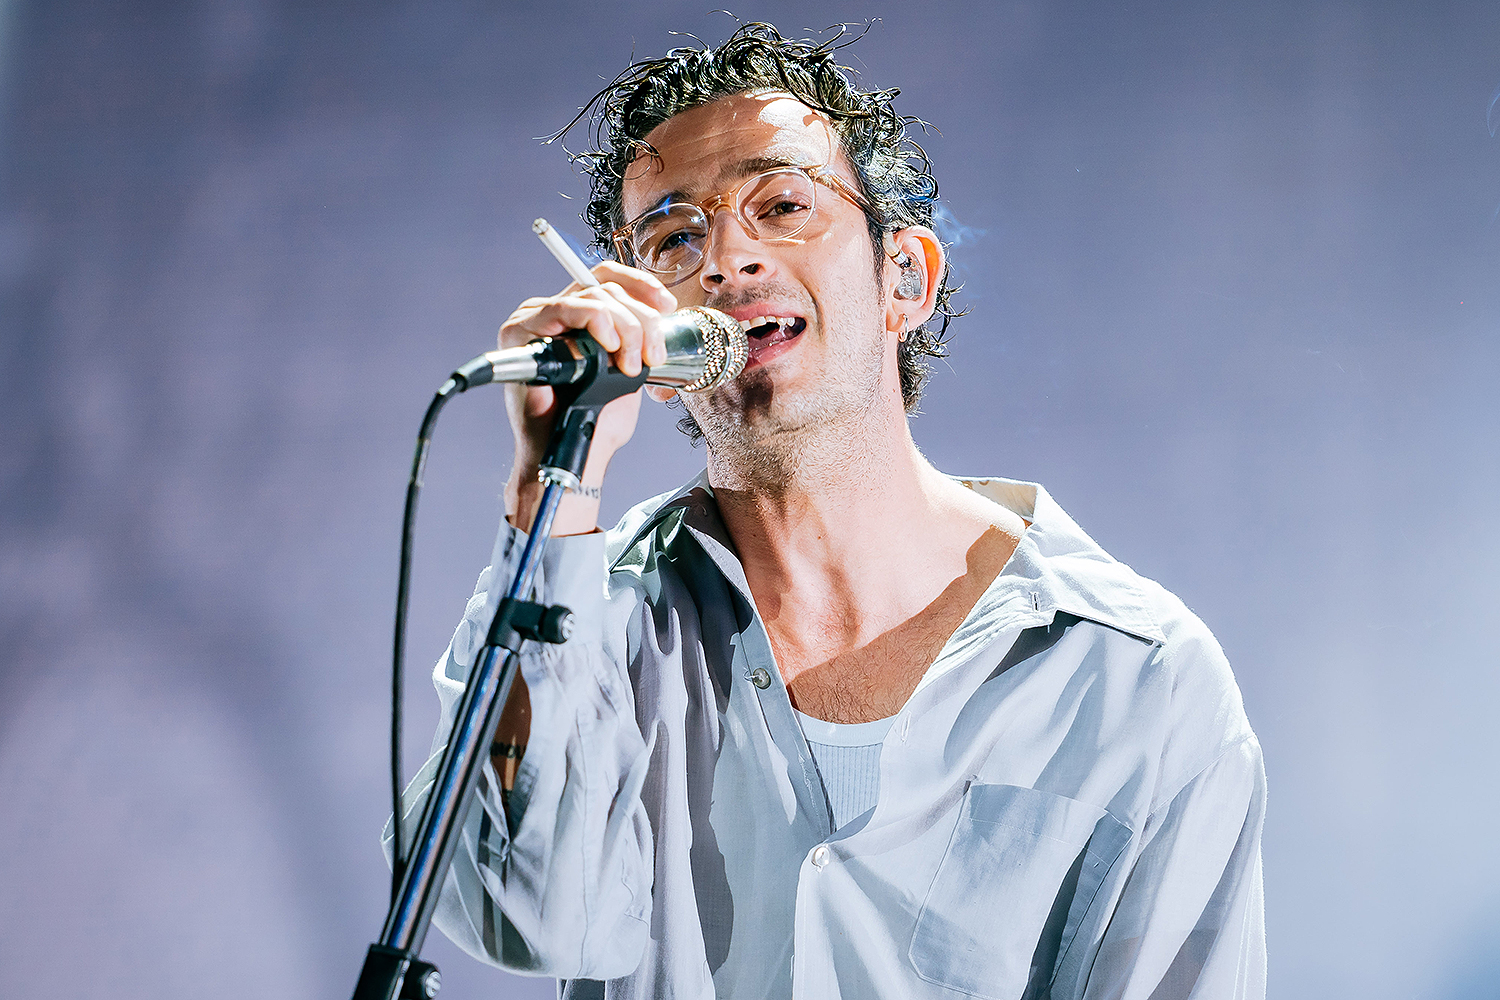 Matthew Healy of The 1975 performs at Southside Festival 2023 at Take-off Gewerbepark on June 16, 2023 in Neuhausen, Germany.